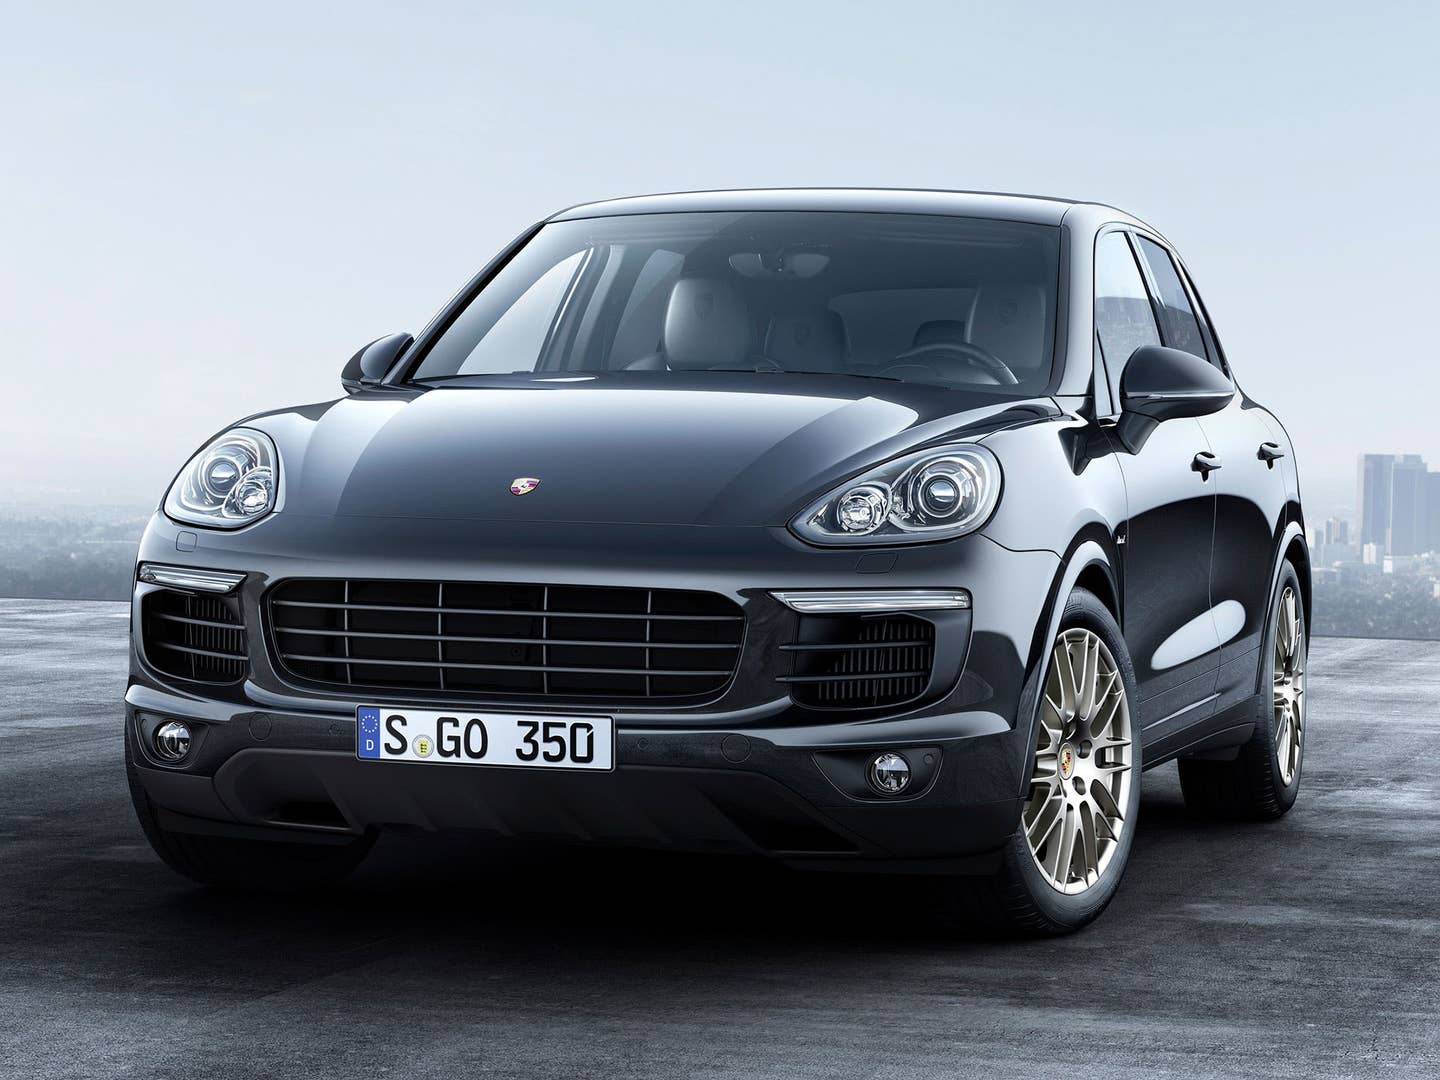 You May Soon Be Able to Buy A Brand New Cayenne Diesel As A Used Car